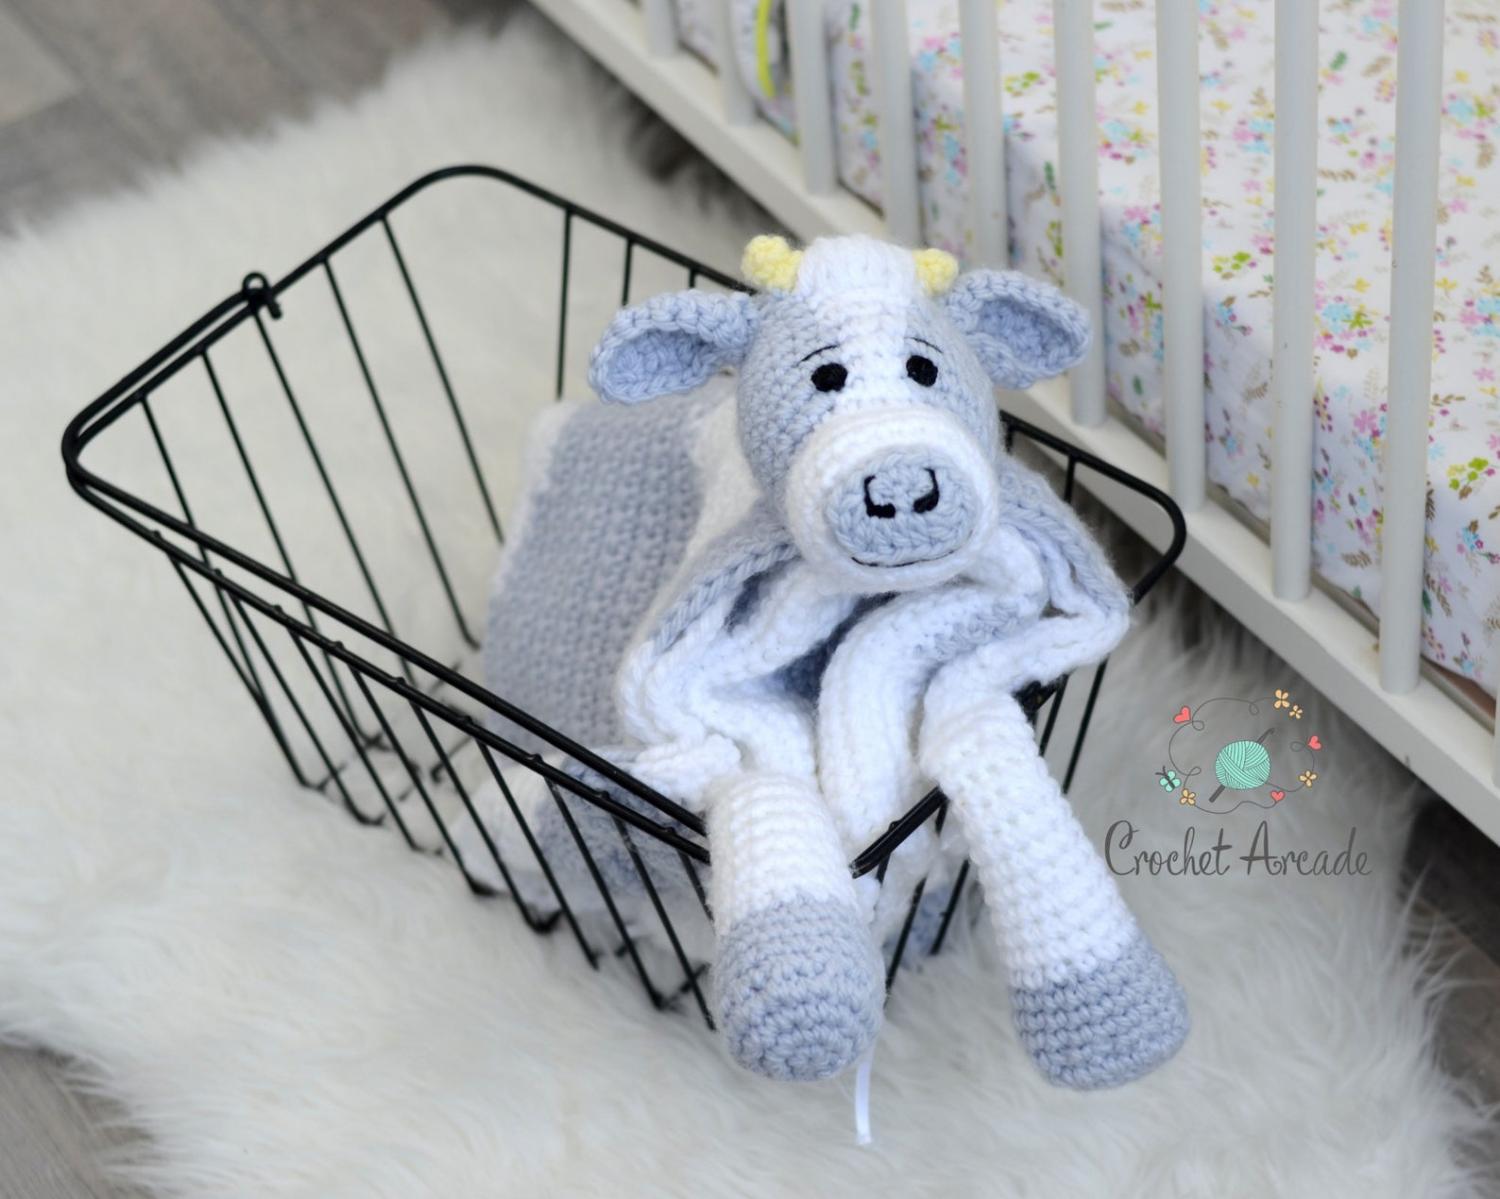 These Crochet Animal Head Blankets Are The Perfect Idea For Newborns